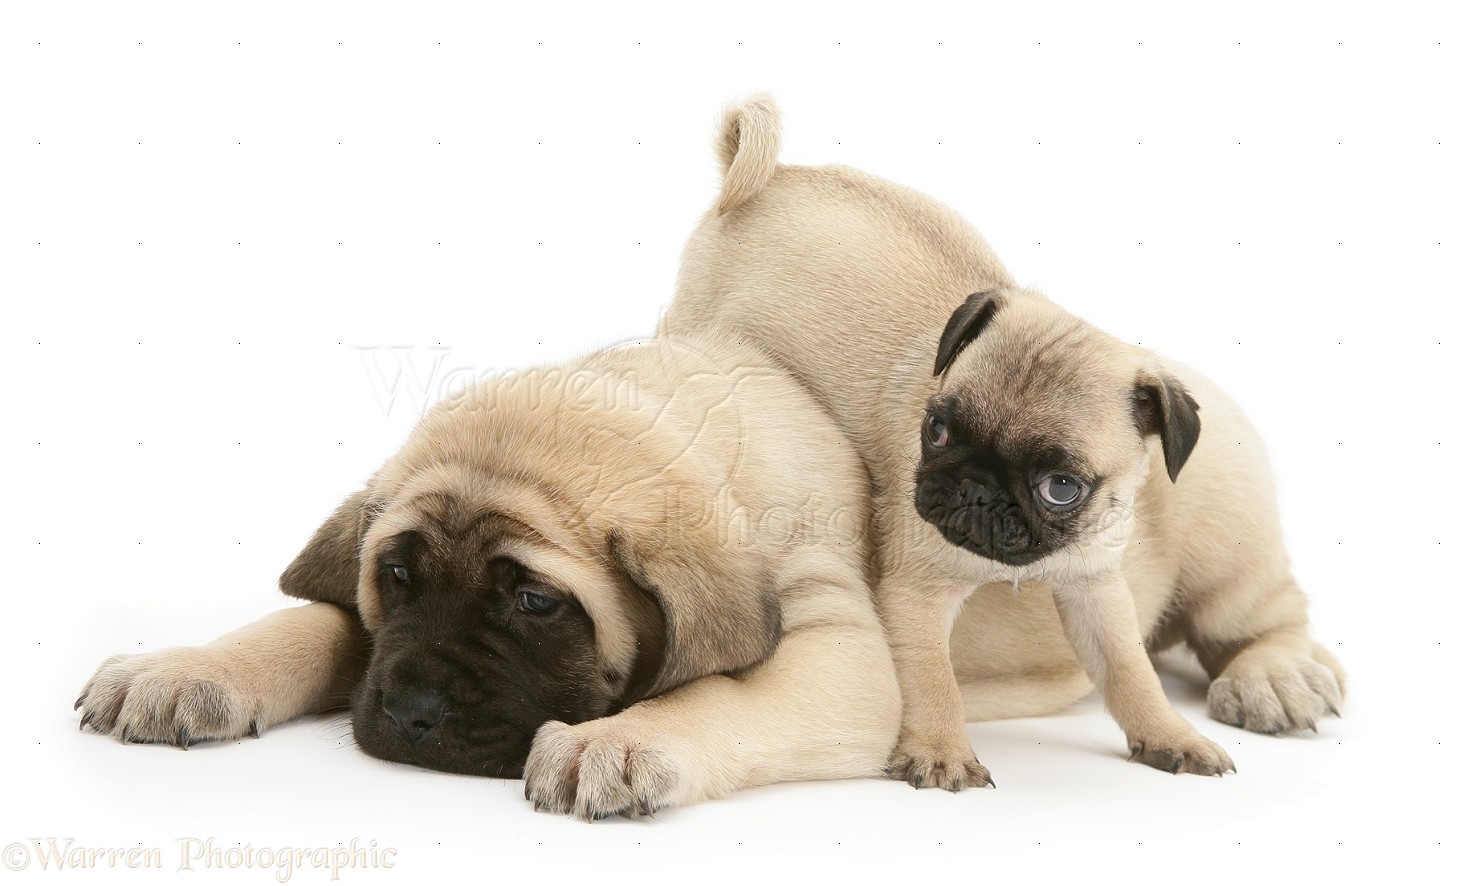 Dogs Fawn Pug Pup With Fawn English Mastiff Pup Photo Wp30799